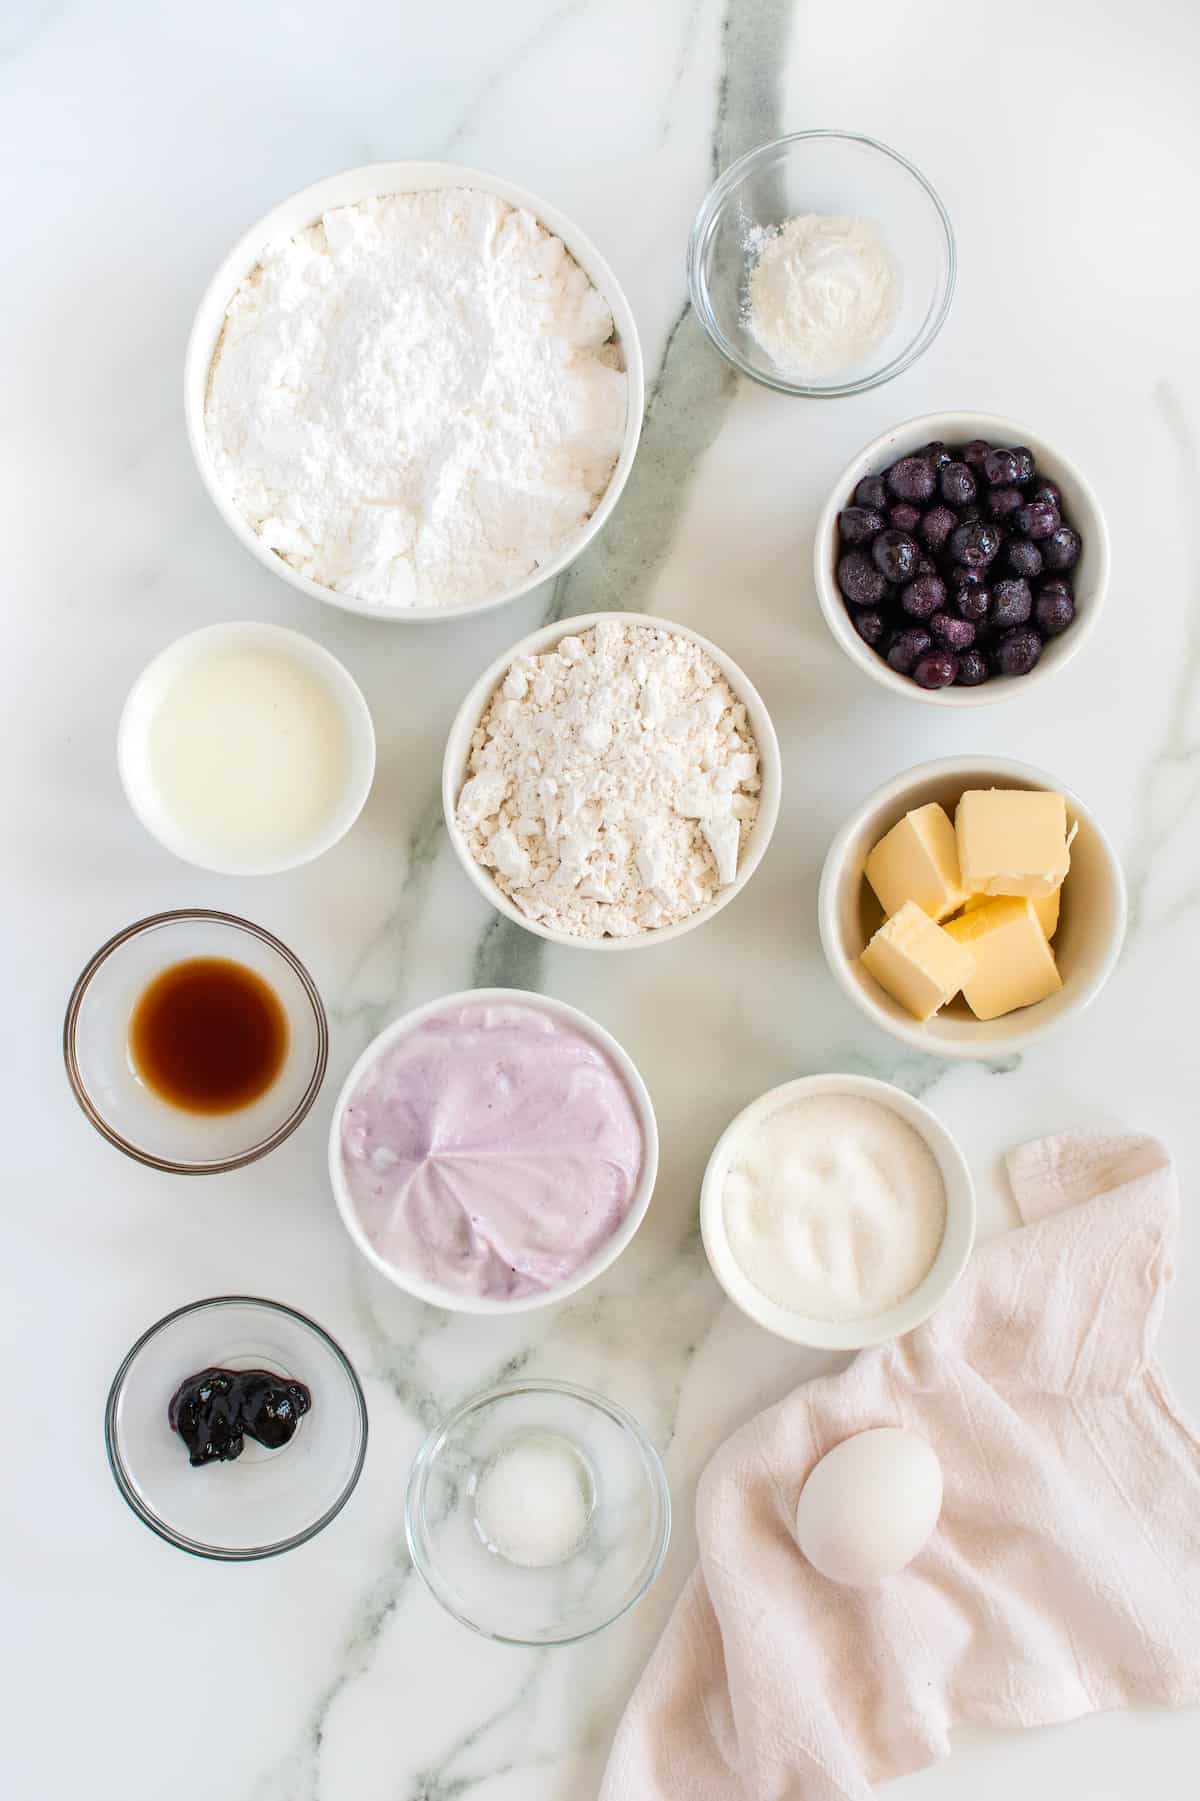 All the ingredients for blueberry fritters in small glass dishes on a white marble counter.